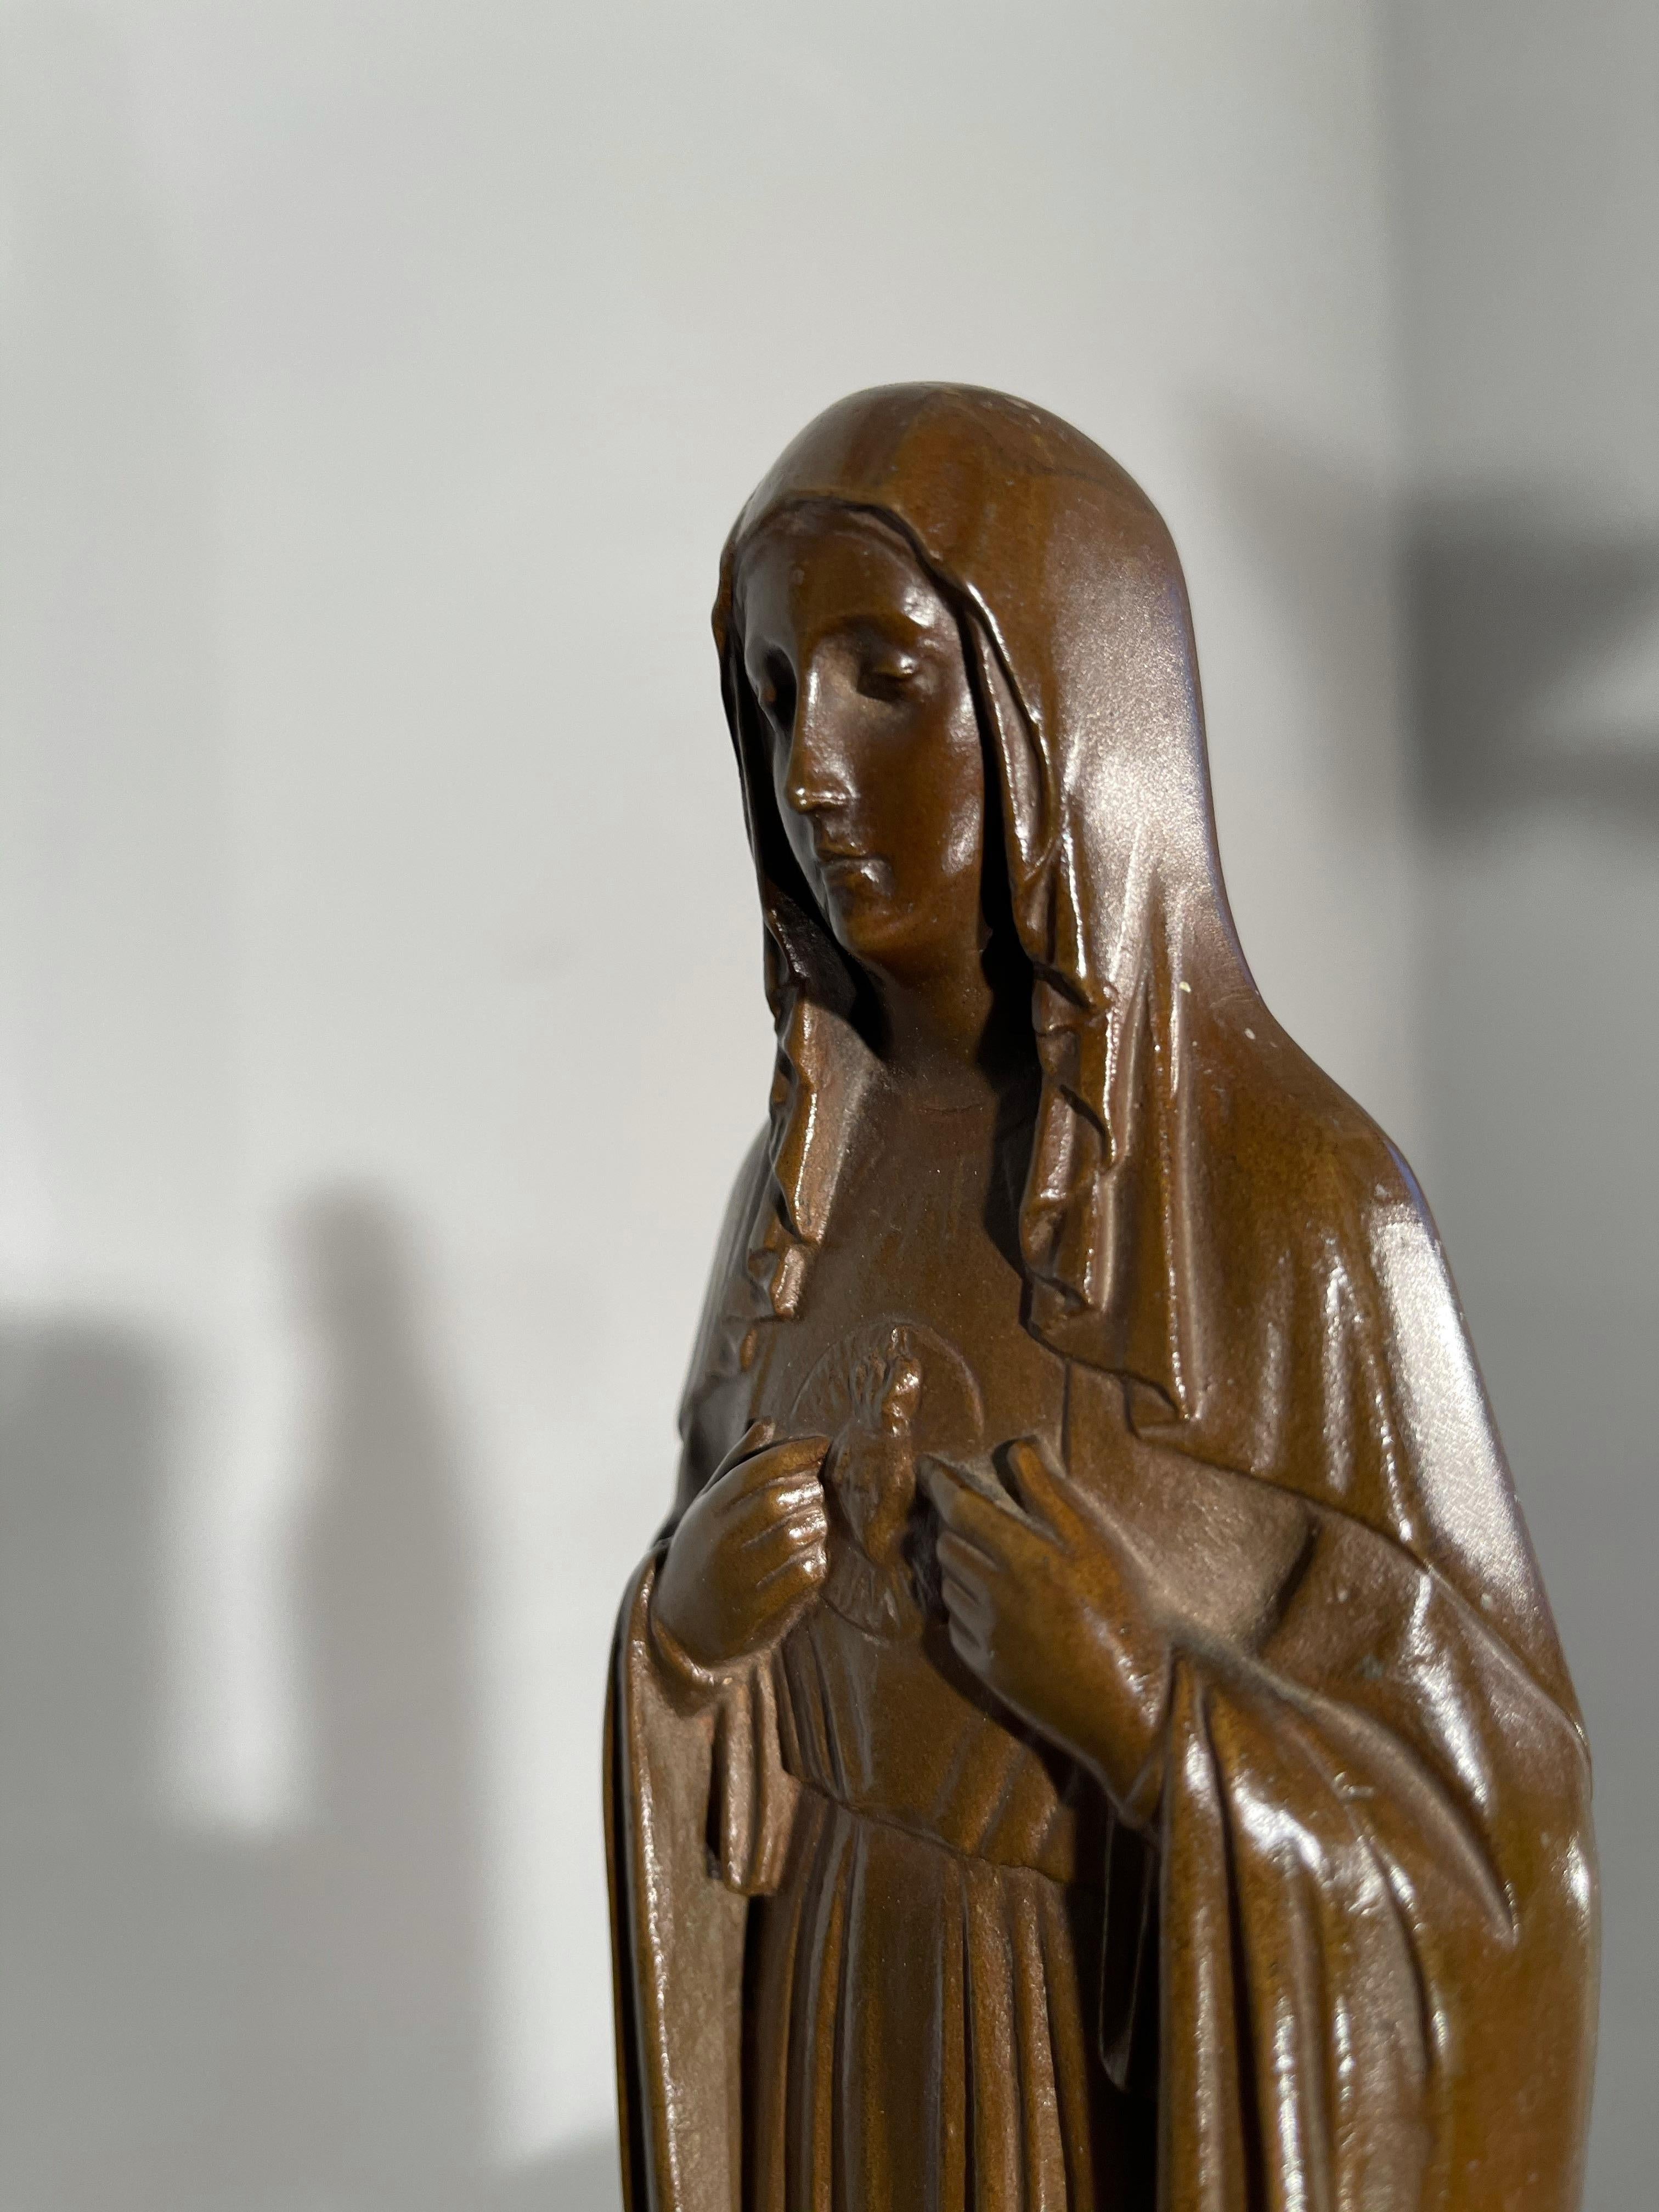 Rare Patinated Antique Bronze Sculpture of the Immaculate Heart of Virgin Mary For Sale 2